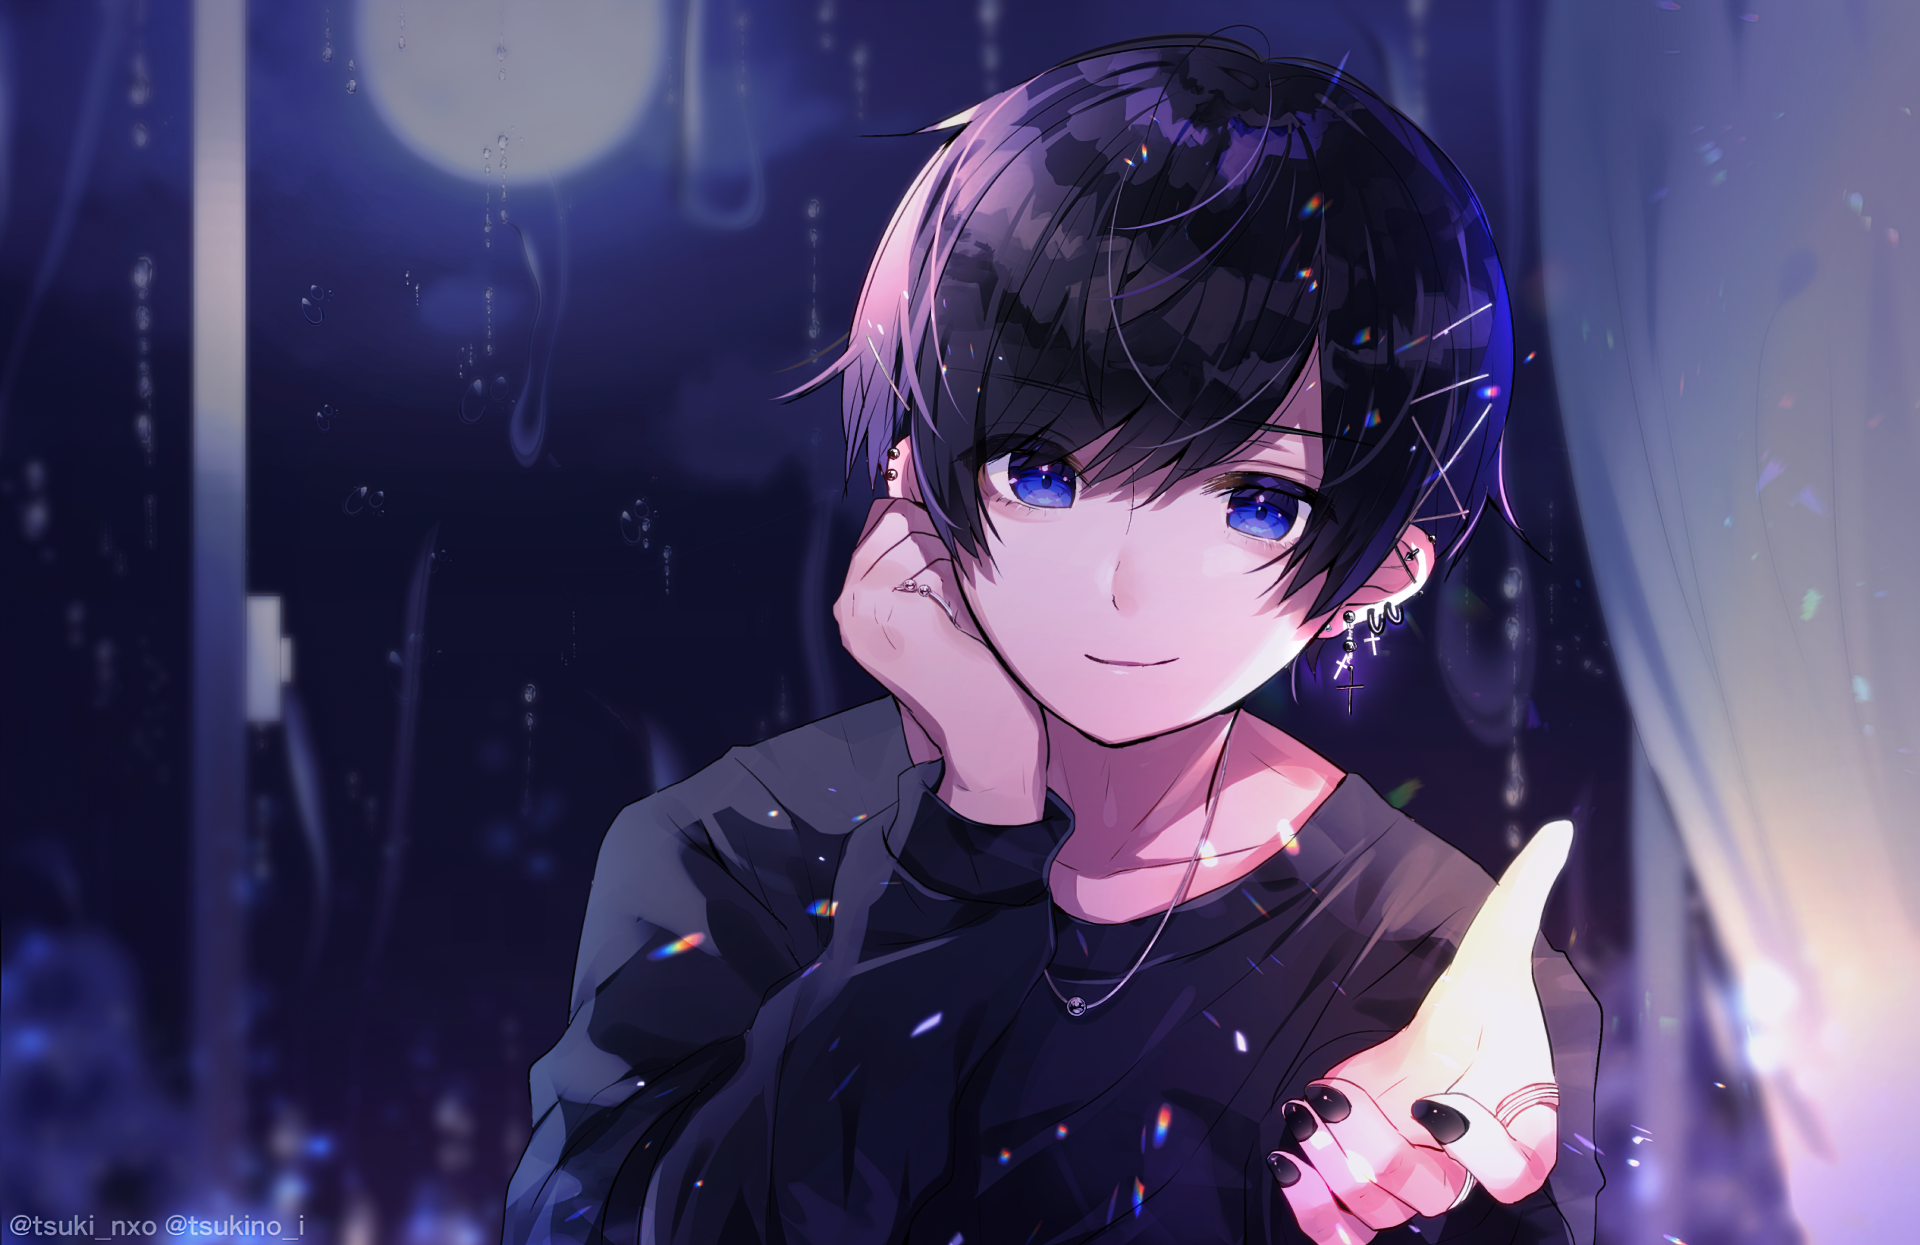 Anime Boy PFP Wallpapers - Getty Wallpapers